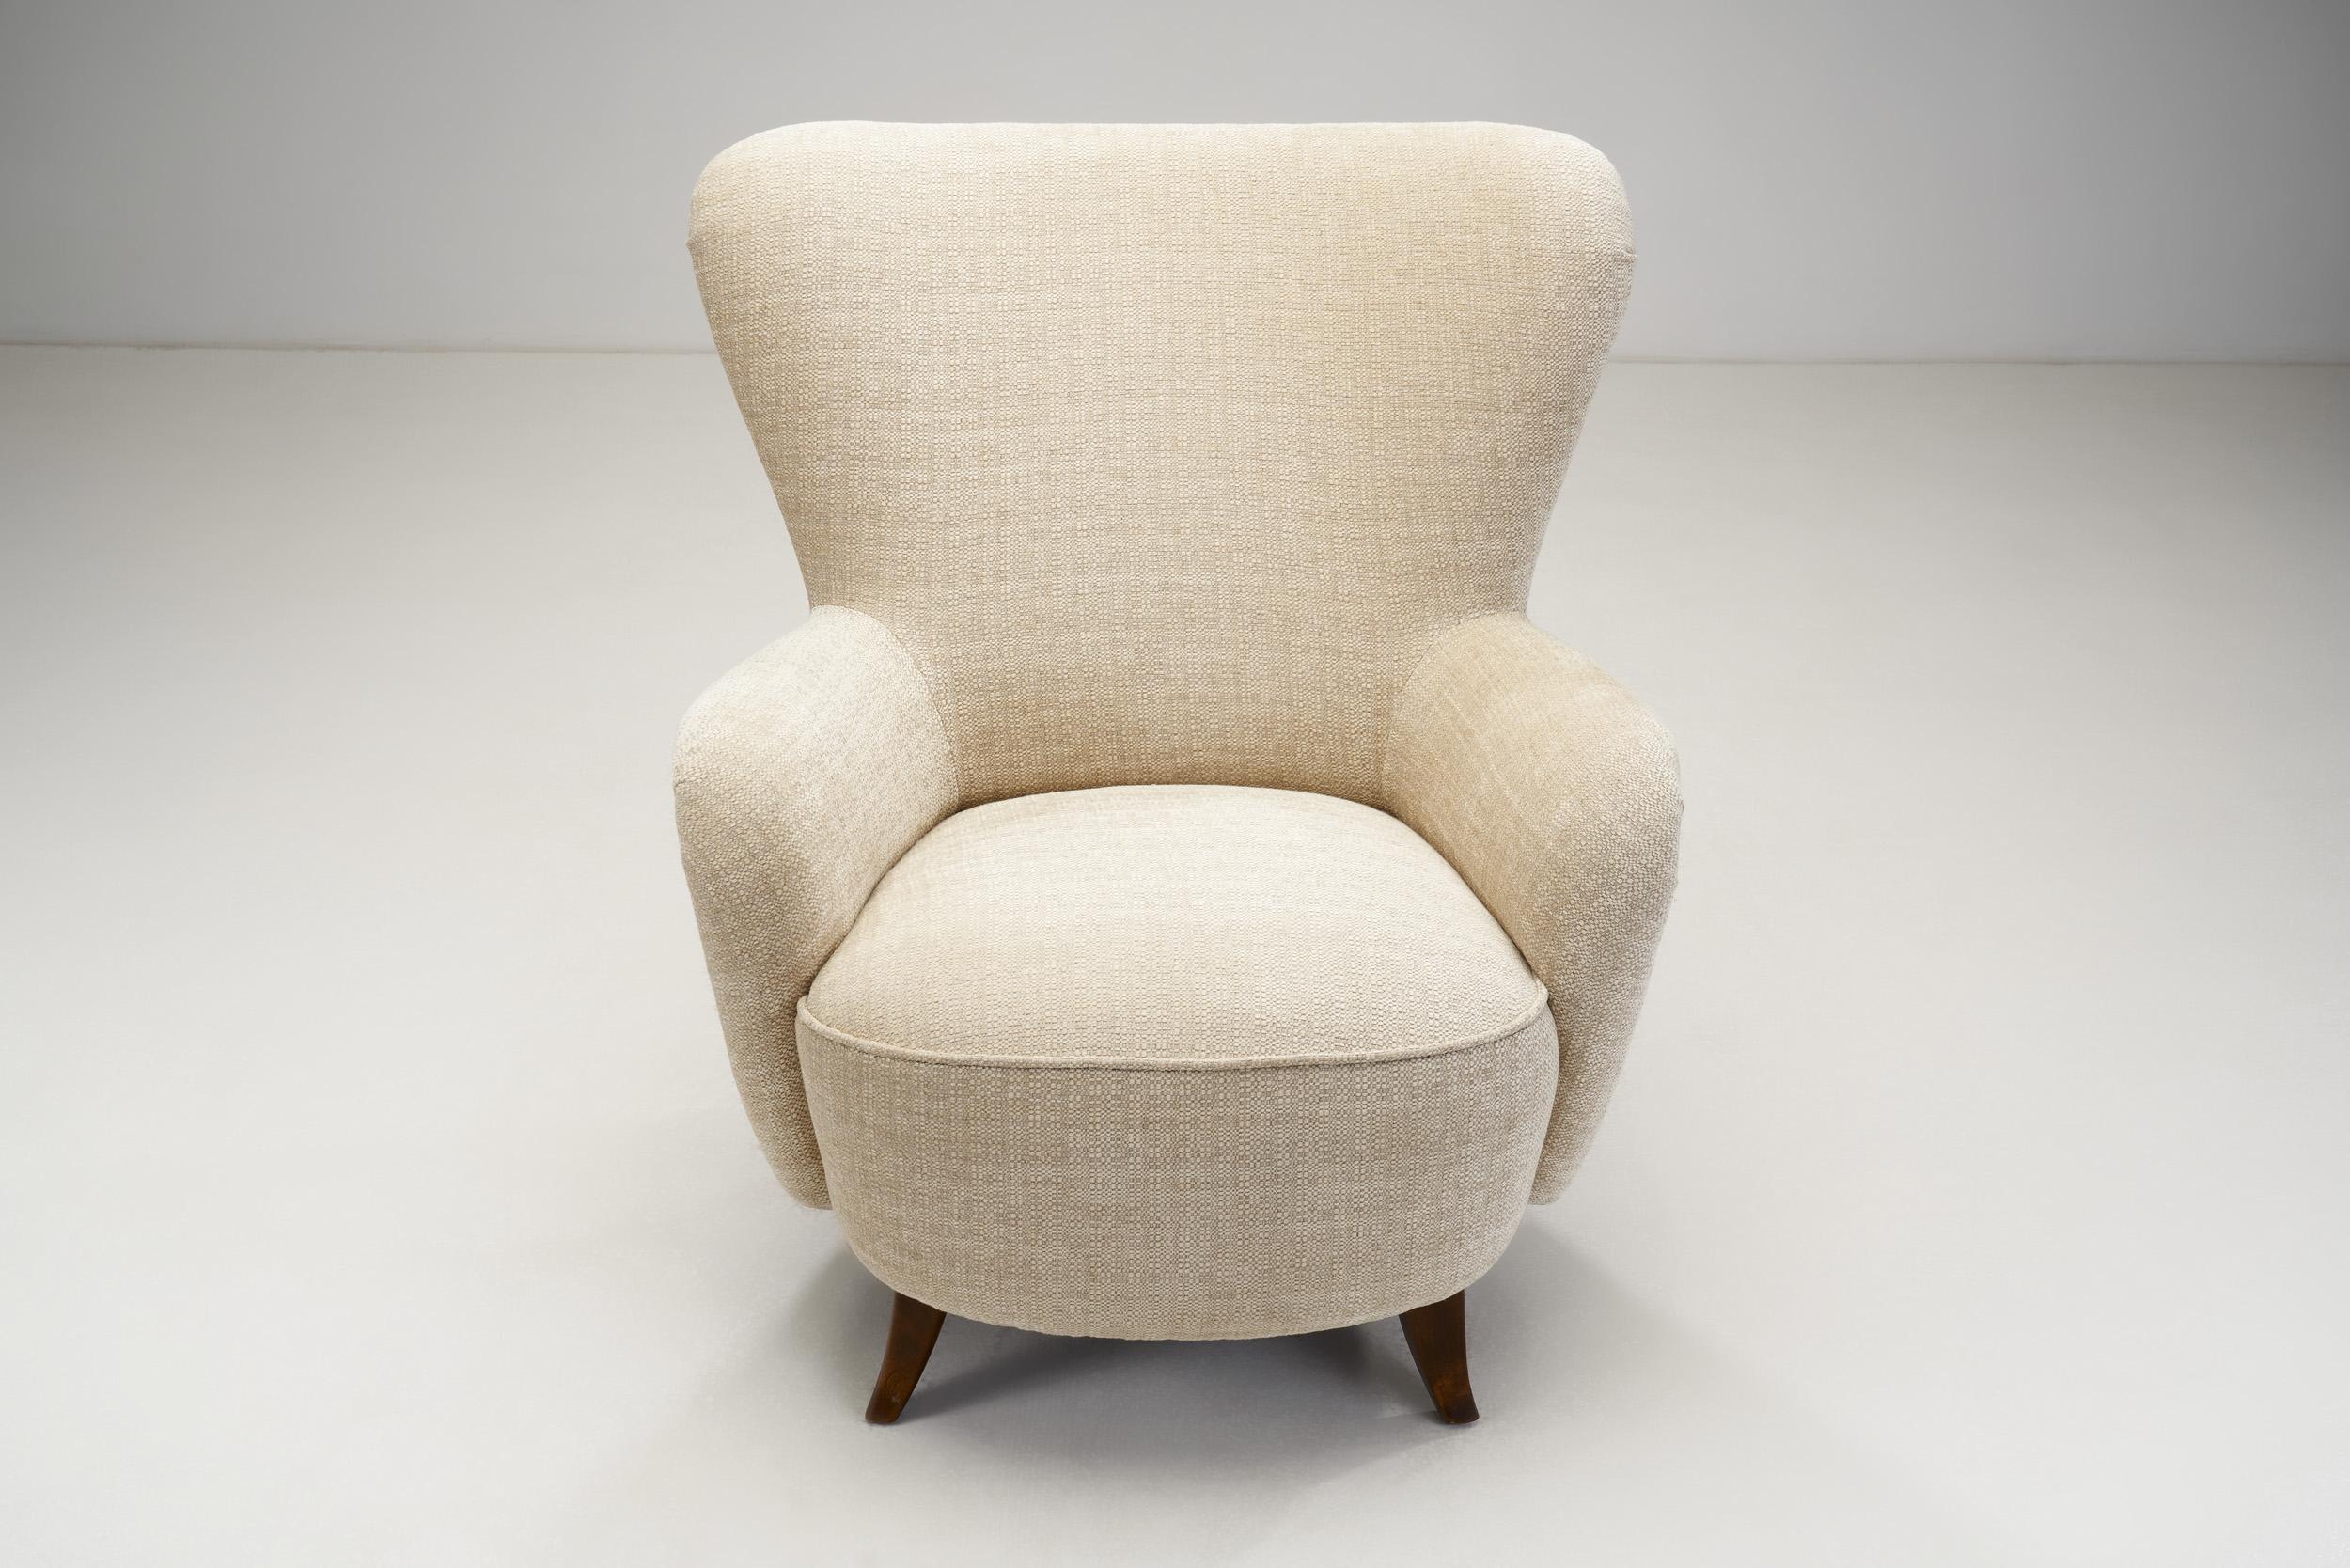 European Mid-Century Modern Upholstered Lounge Chairs, Europe, circa 1950s For Sale 1